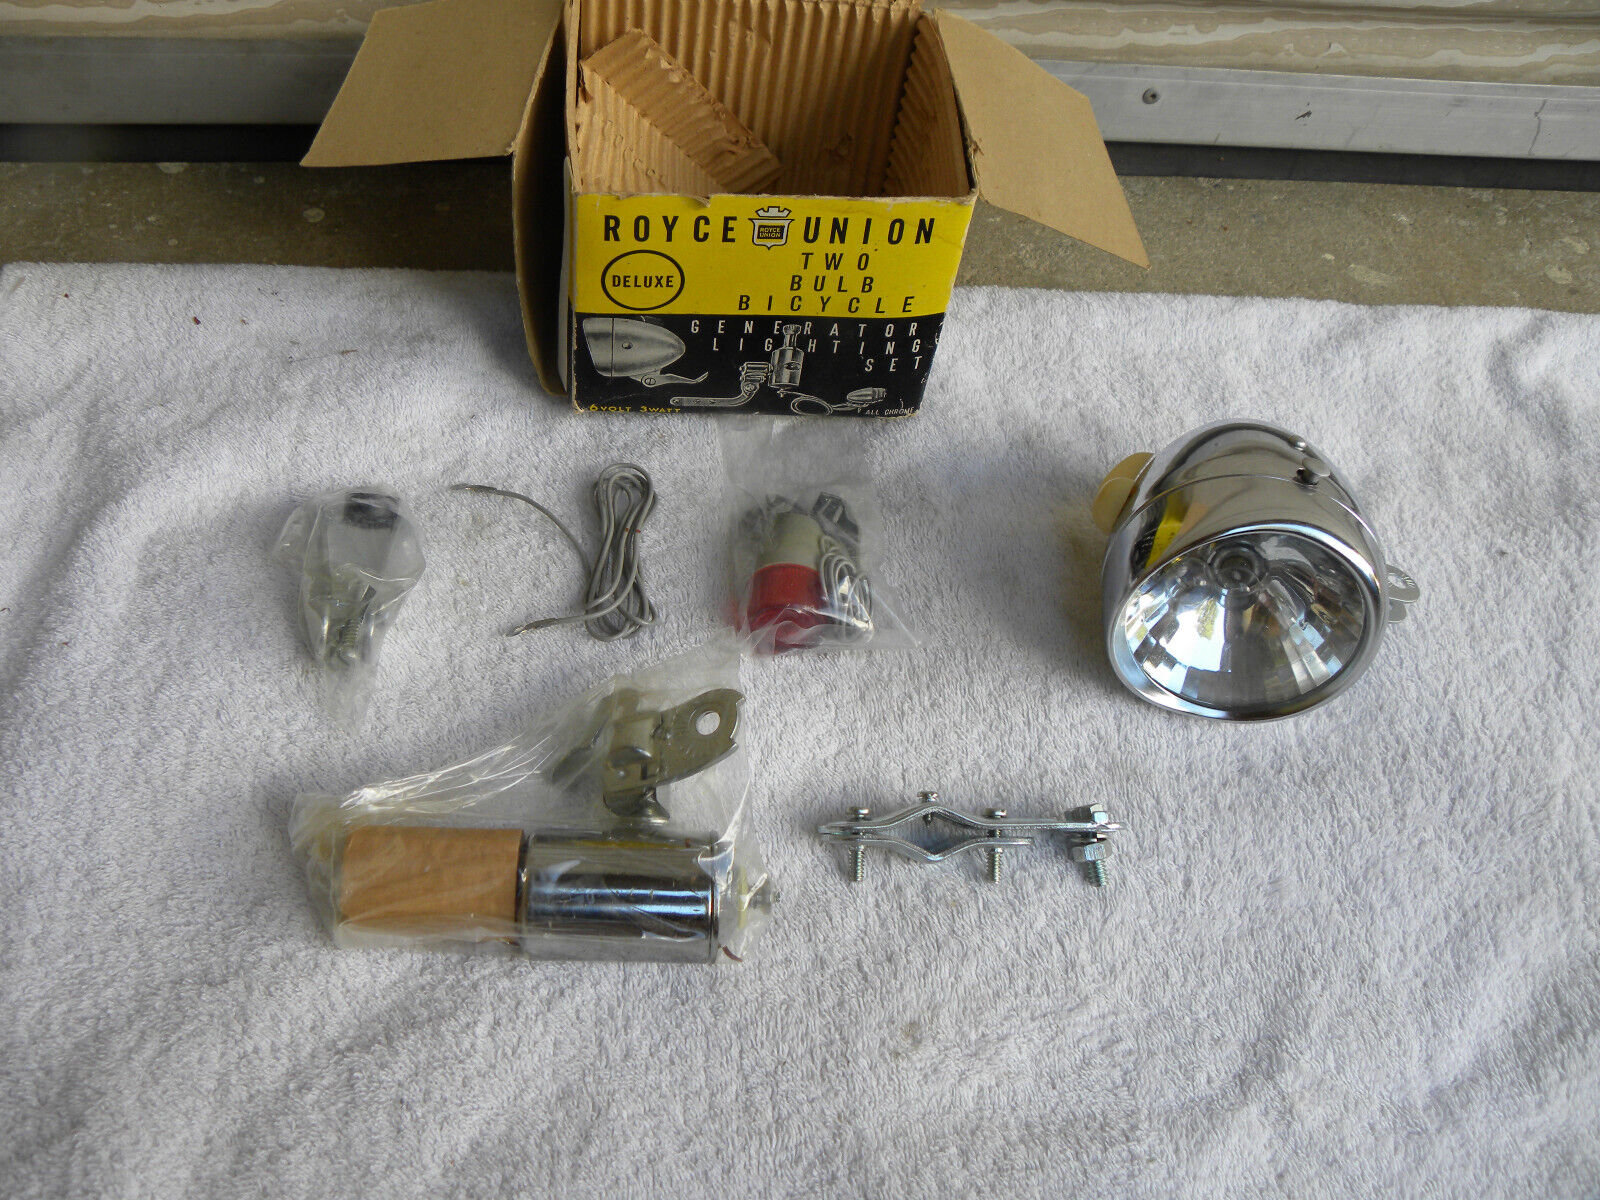 Vintage Royce Union Deluxe Bike Bicycle 2 Bulb Head Light Model 1601   NEW NOS